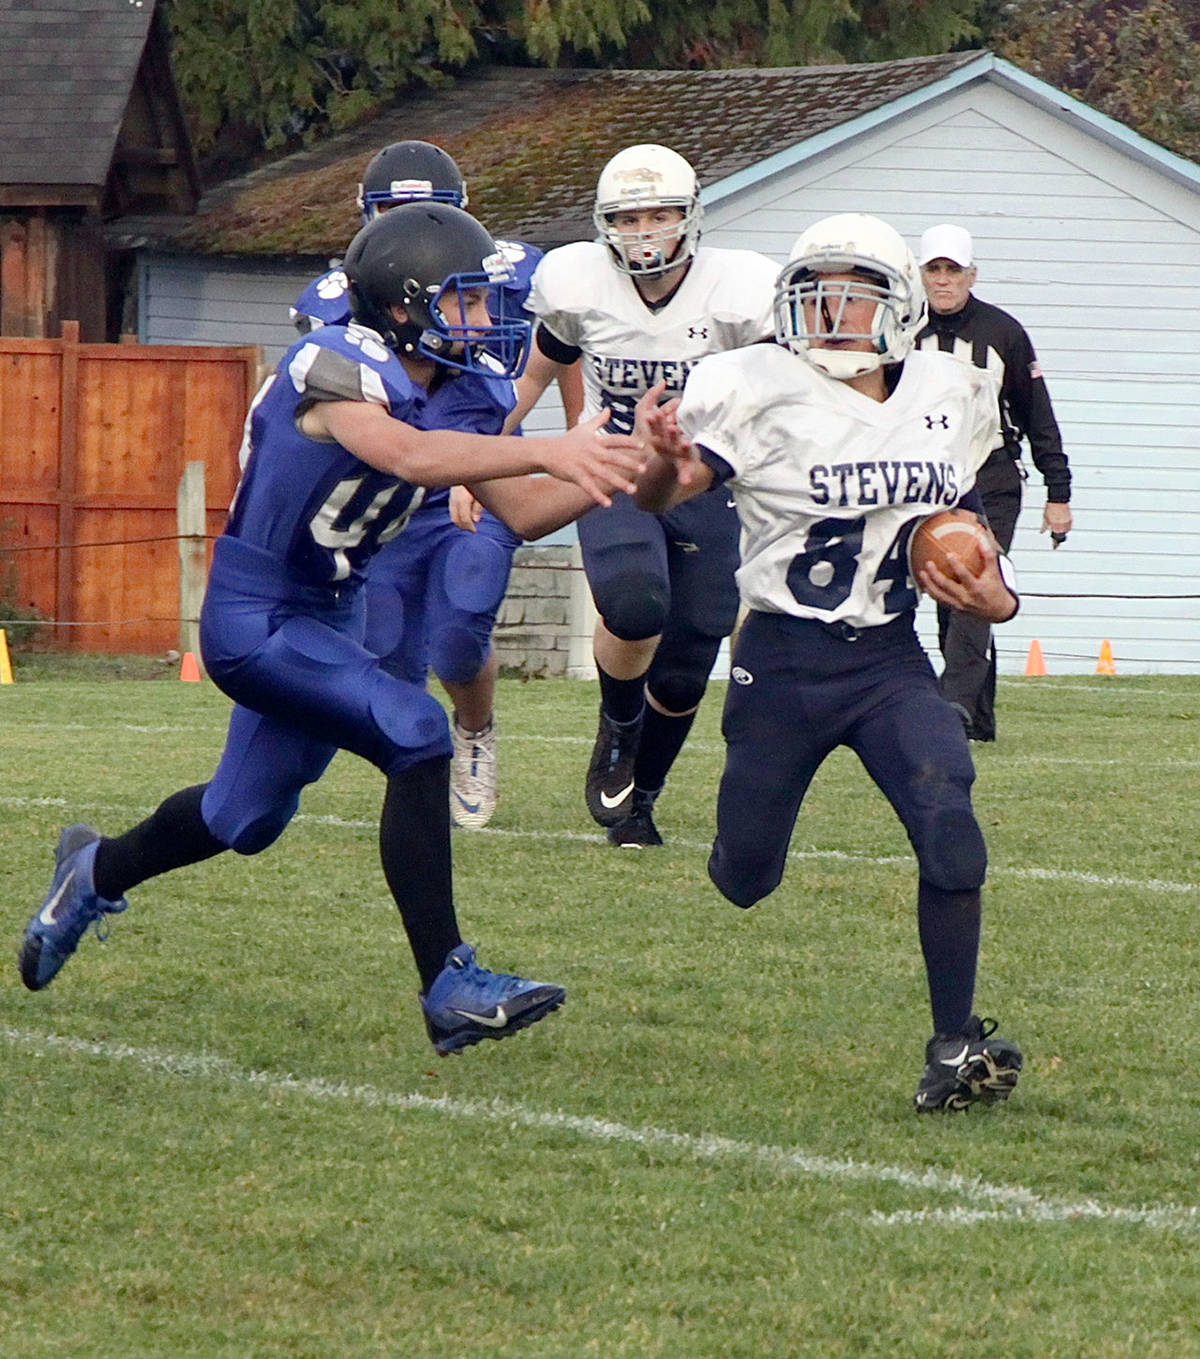 Phoenix Flores of the Stevens Middle School Stampeders, right, tries to avoid a Poulsbo Panthers defender during Stevens’ 38-0 loss to undefeated Poulsbo on Wednesday. (Dave Logan/for Peninsula Daily News)